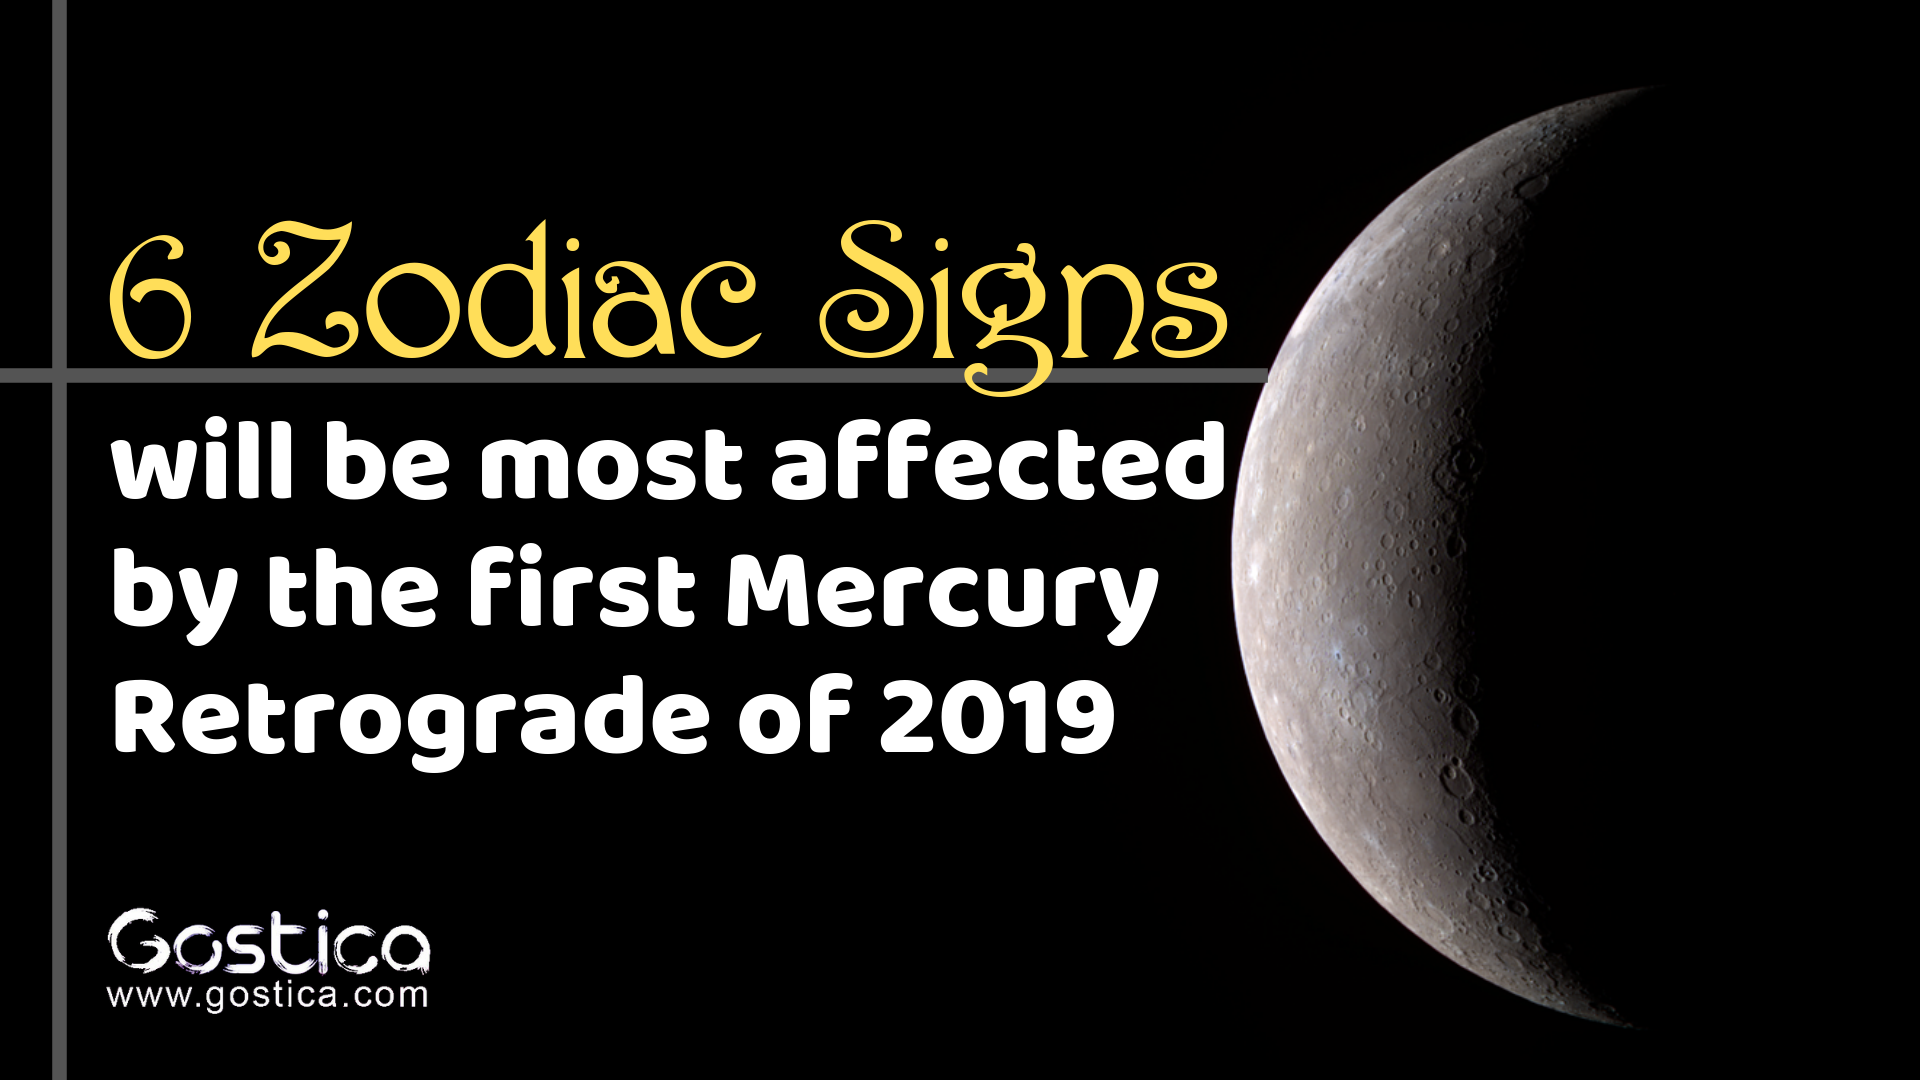 The 6 Zodiac Signs That Will Be Most Affected By The First Mercury